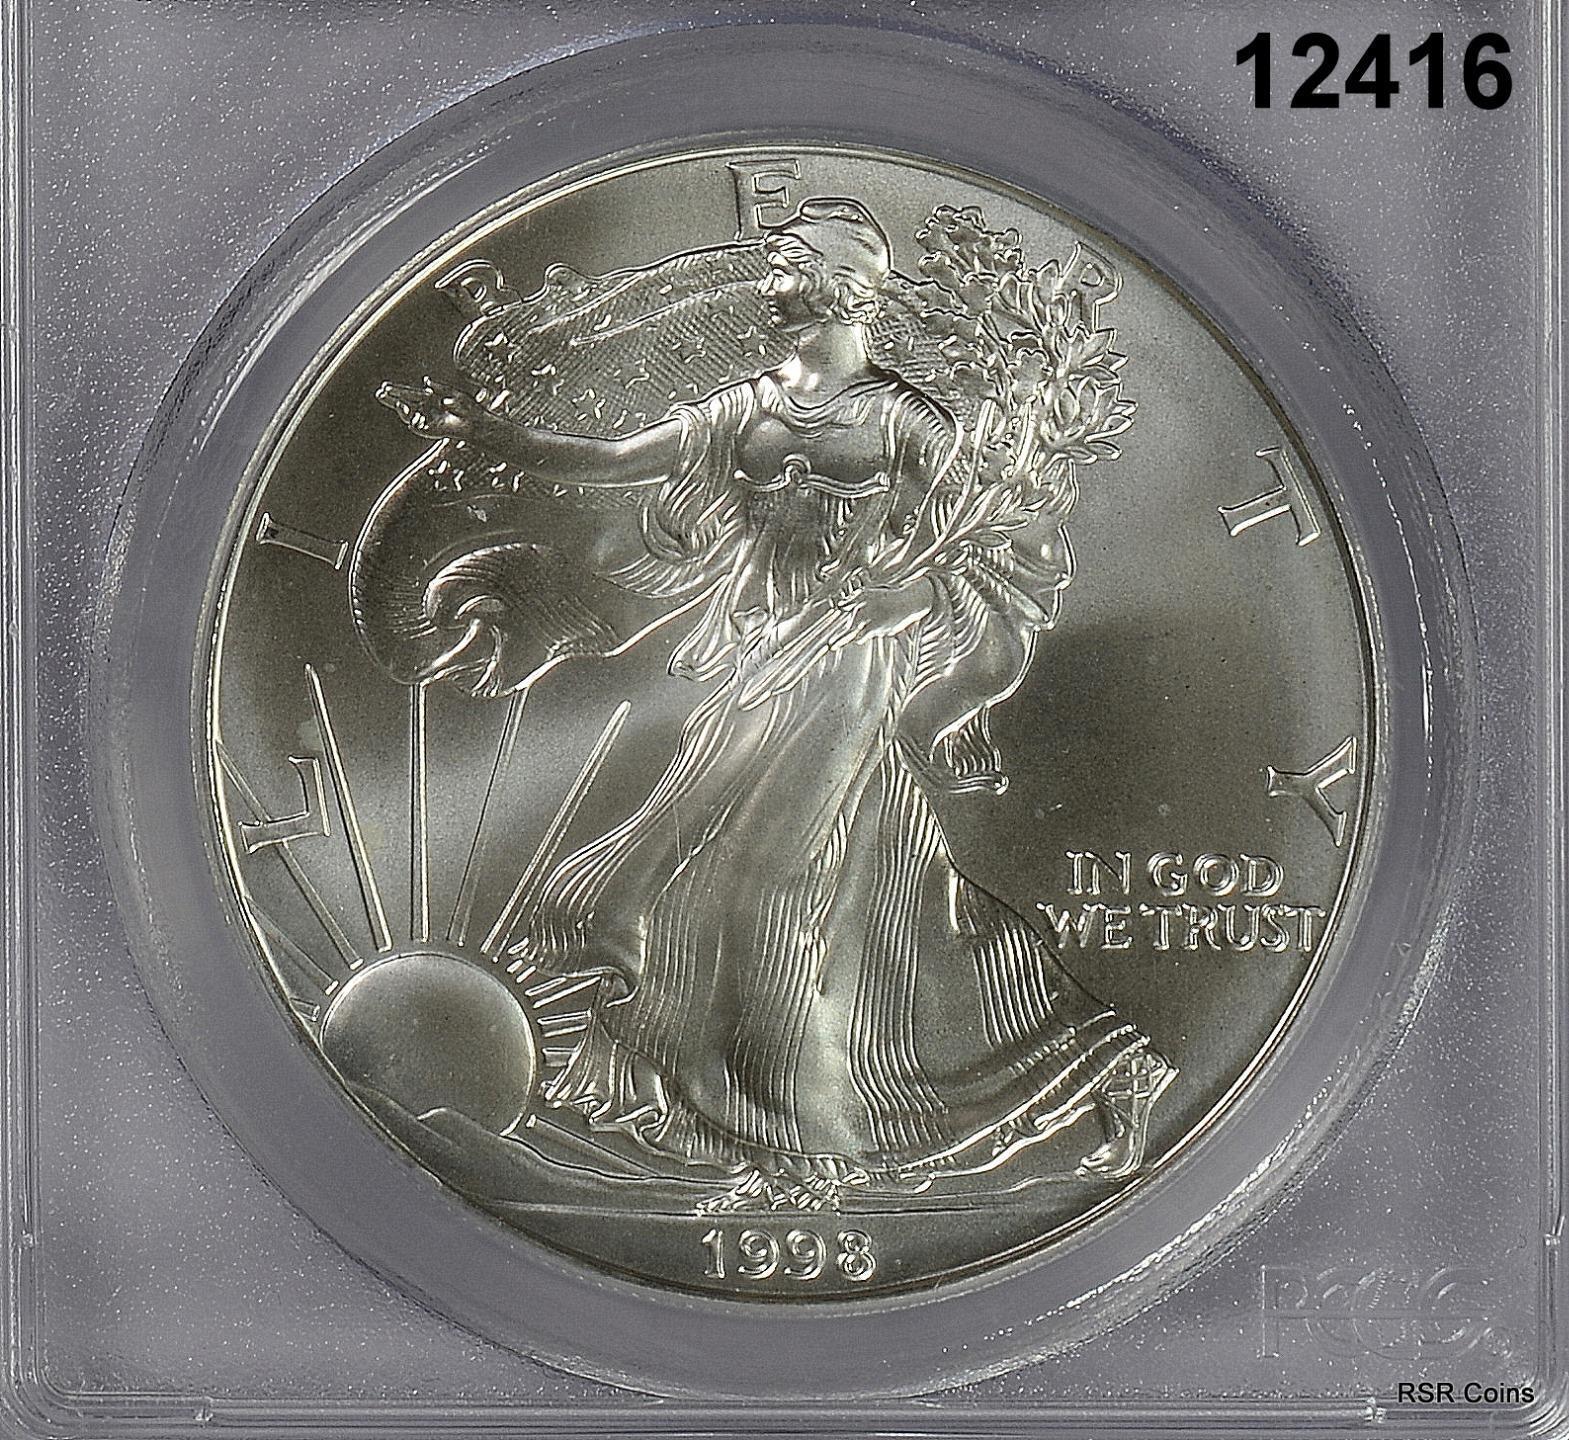 2018 S SILVER EAGLE PCGS CERTIFIED MS69 FIRST STRIKE FLAG RARE!! #12416